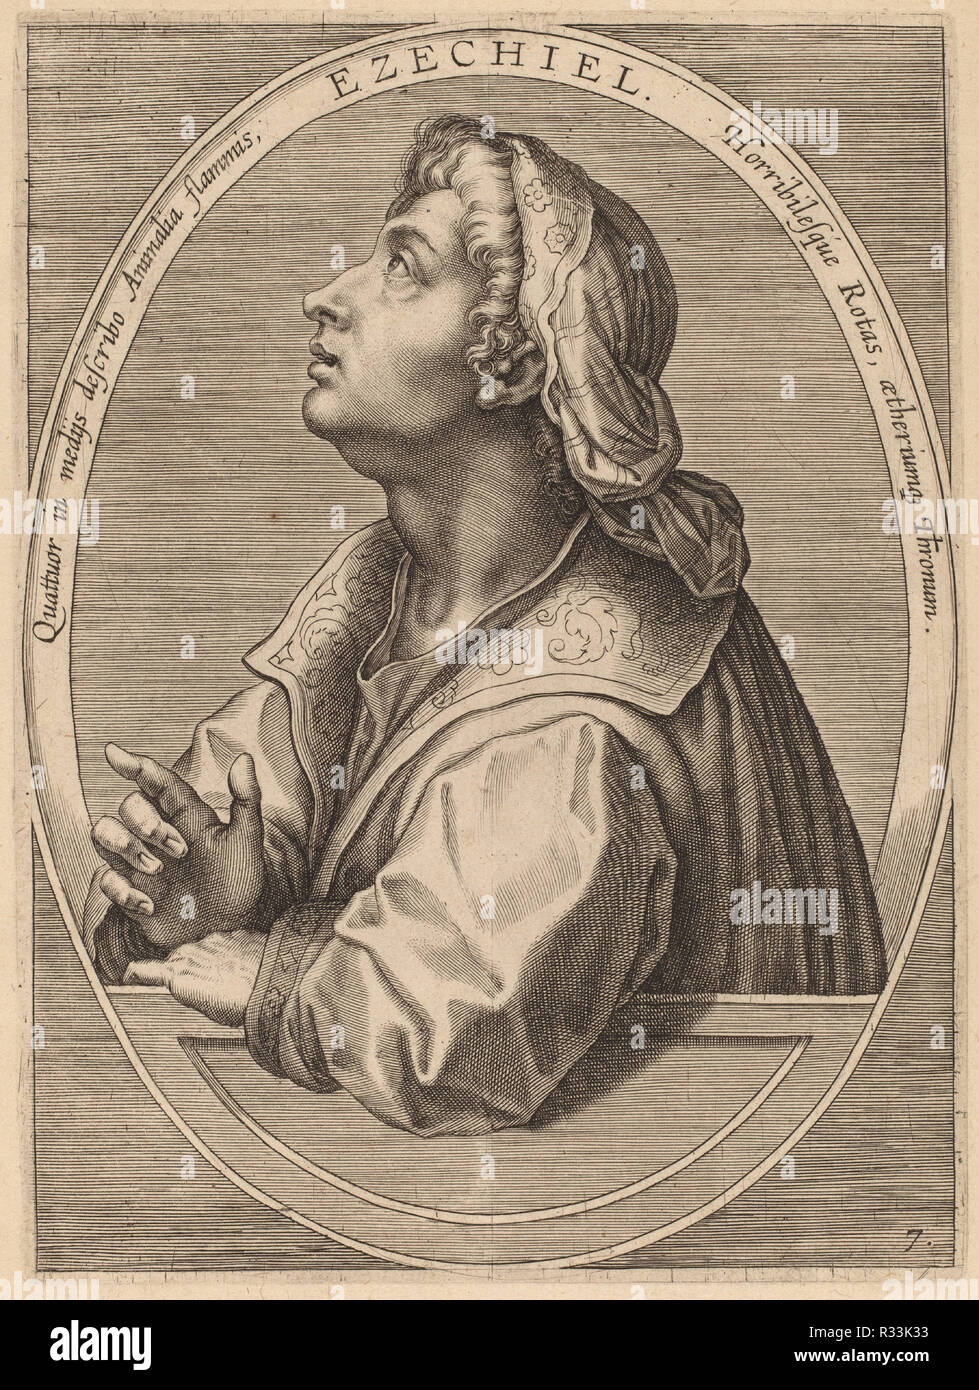 Ezechial. Dated: published 1613. Dimensions: plate: 17.9 x 13.3 cm (7 1/16 x 5 1/4 in.)  sheet: 24.3 x 19 cm (9 9/16 x 7 1/2 in.). Medium: engraving on laid paper. Museum: National Gallery of Art, Washington DC. Author: Theodor Galle after Jan van der Straet. Stock Photo